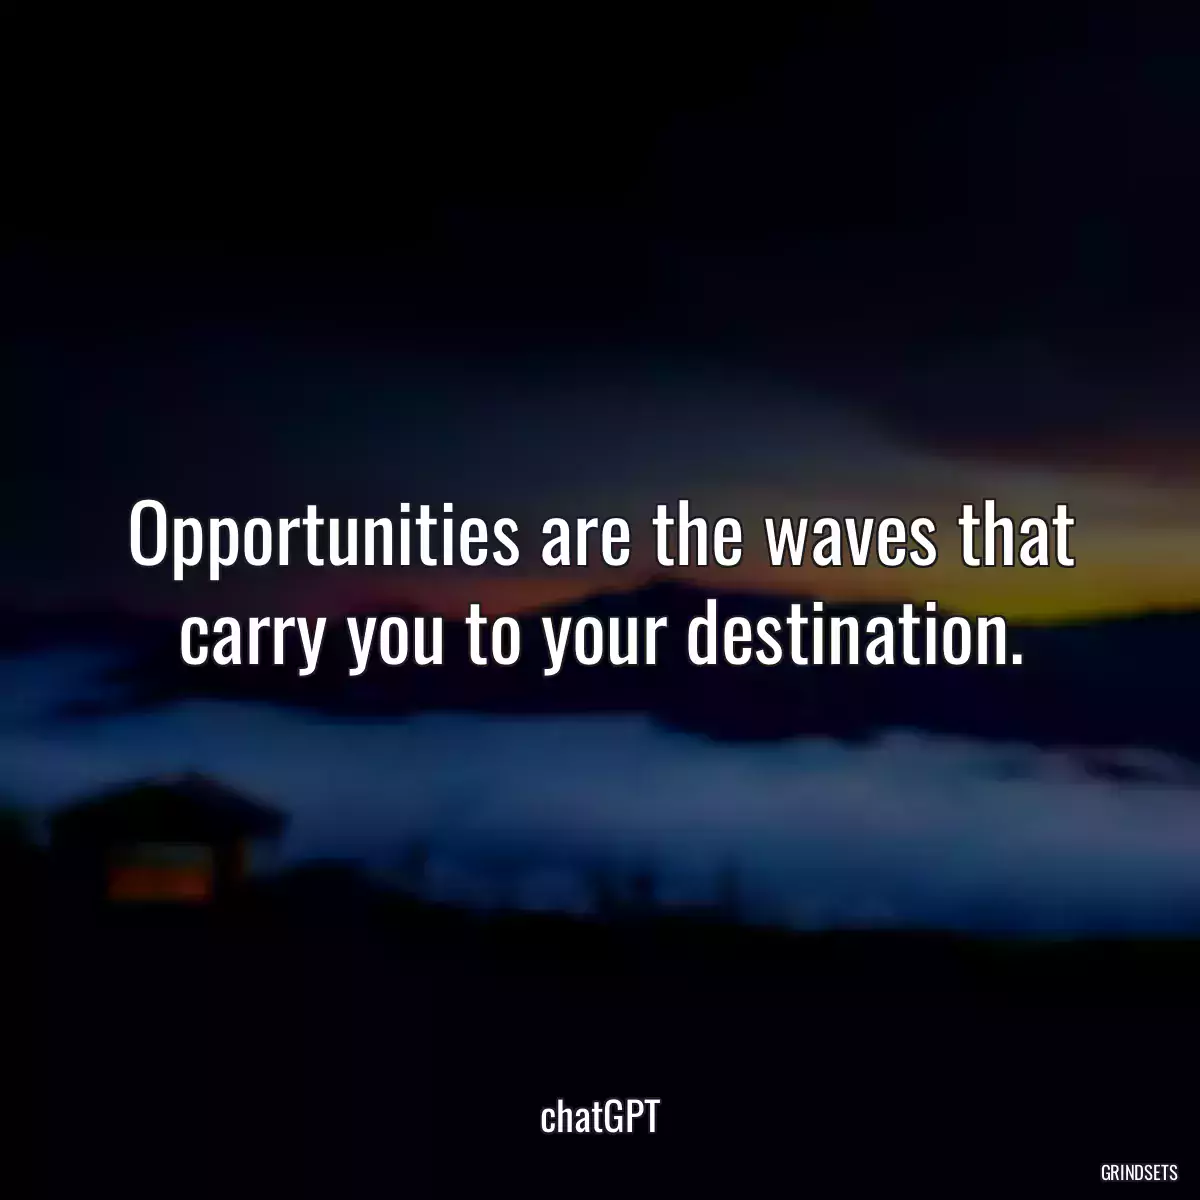 Opportunities are the waves that carry you to your destination.